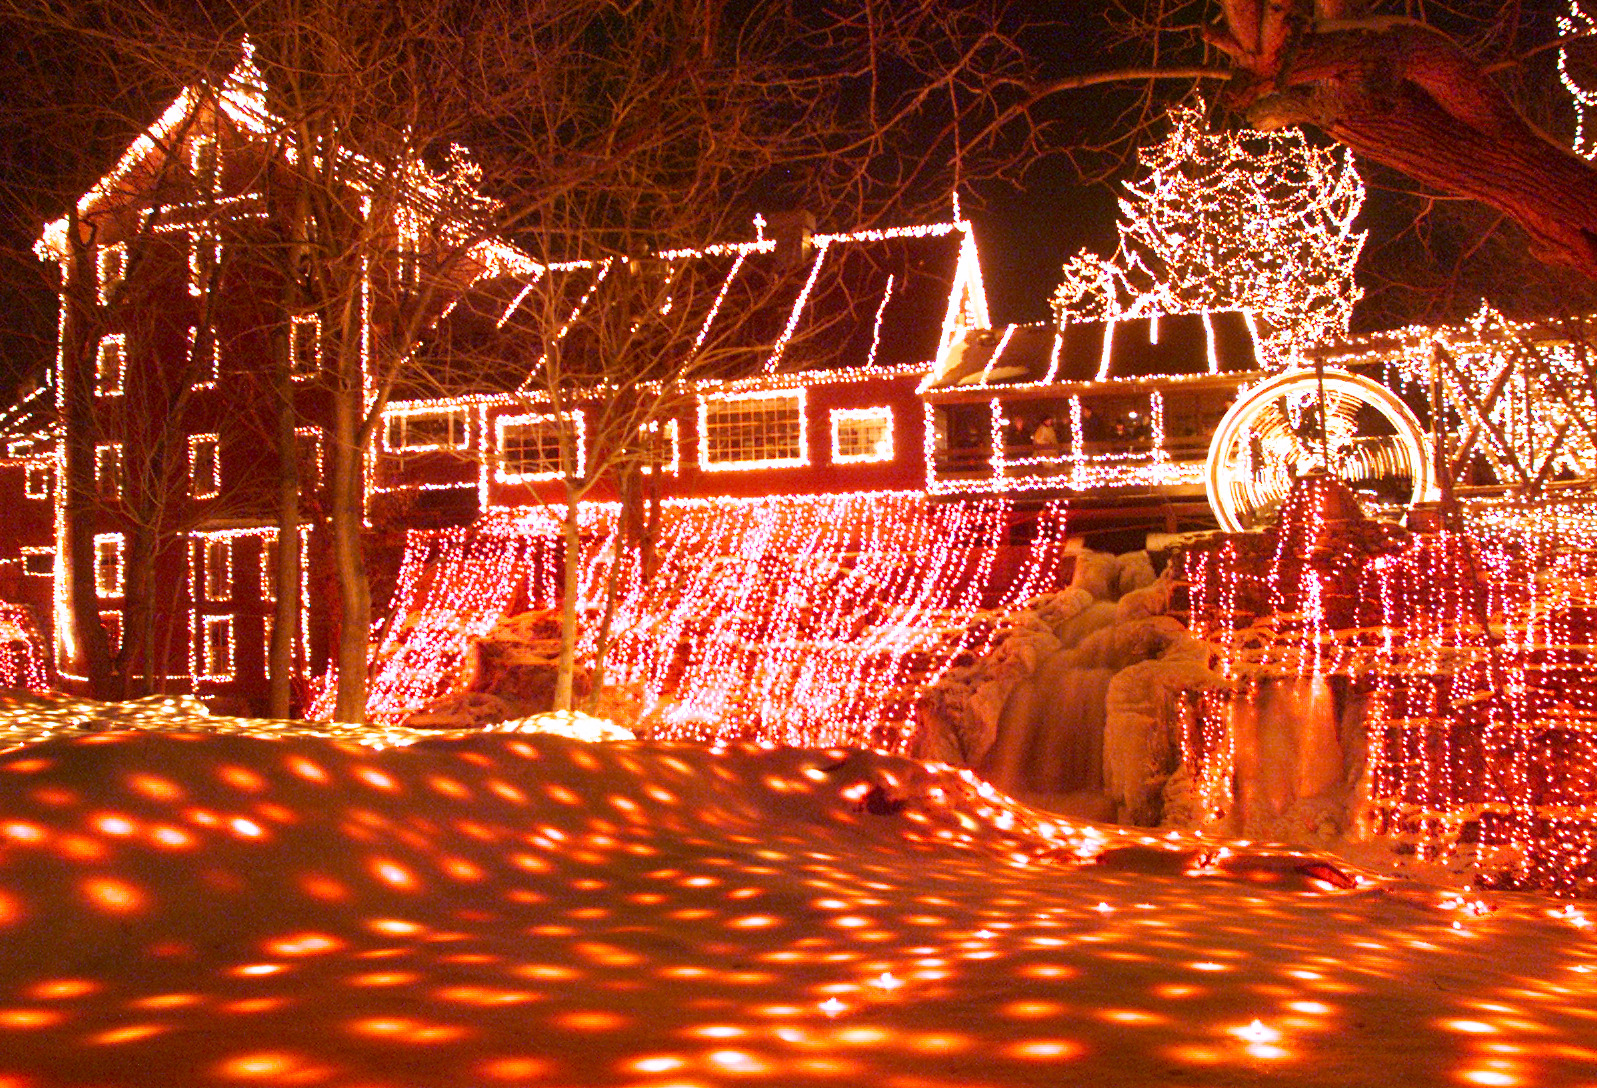 Clifton Mill Christmas lights wins grand prize on ABC TV special